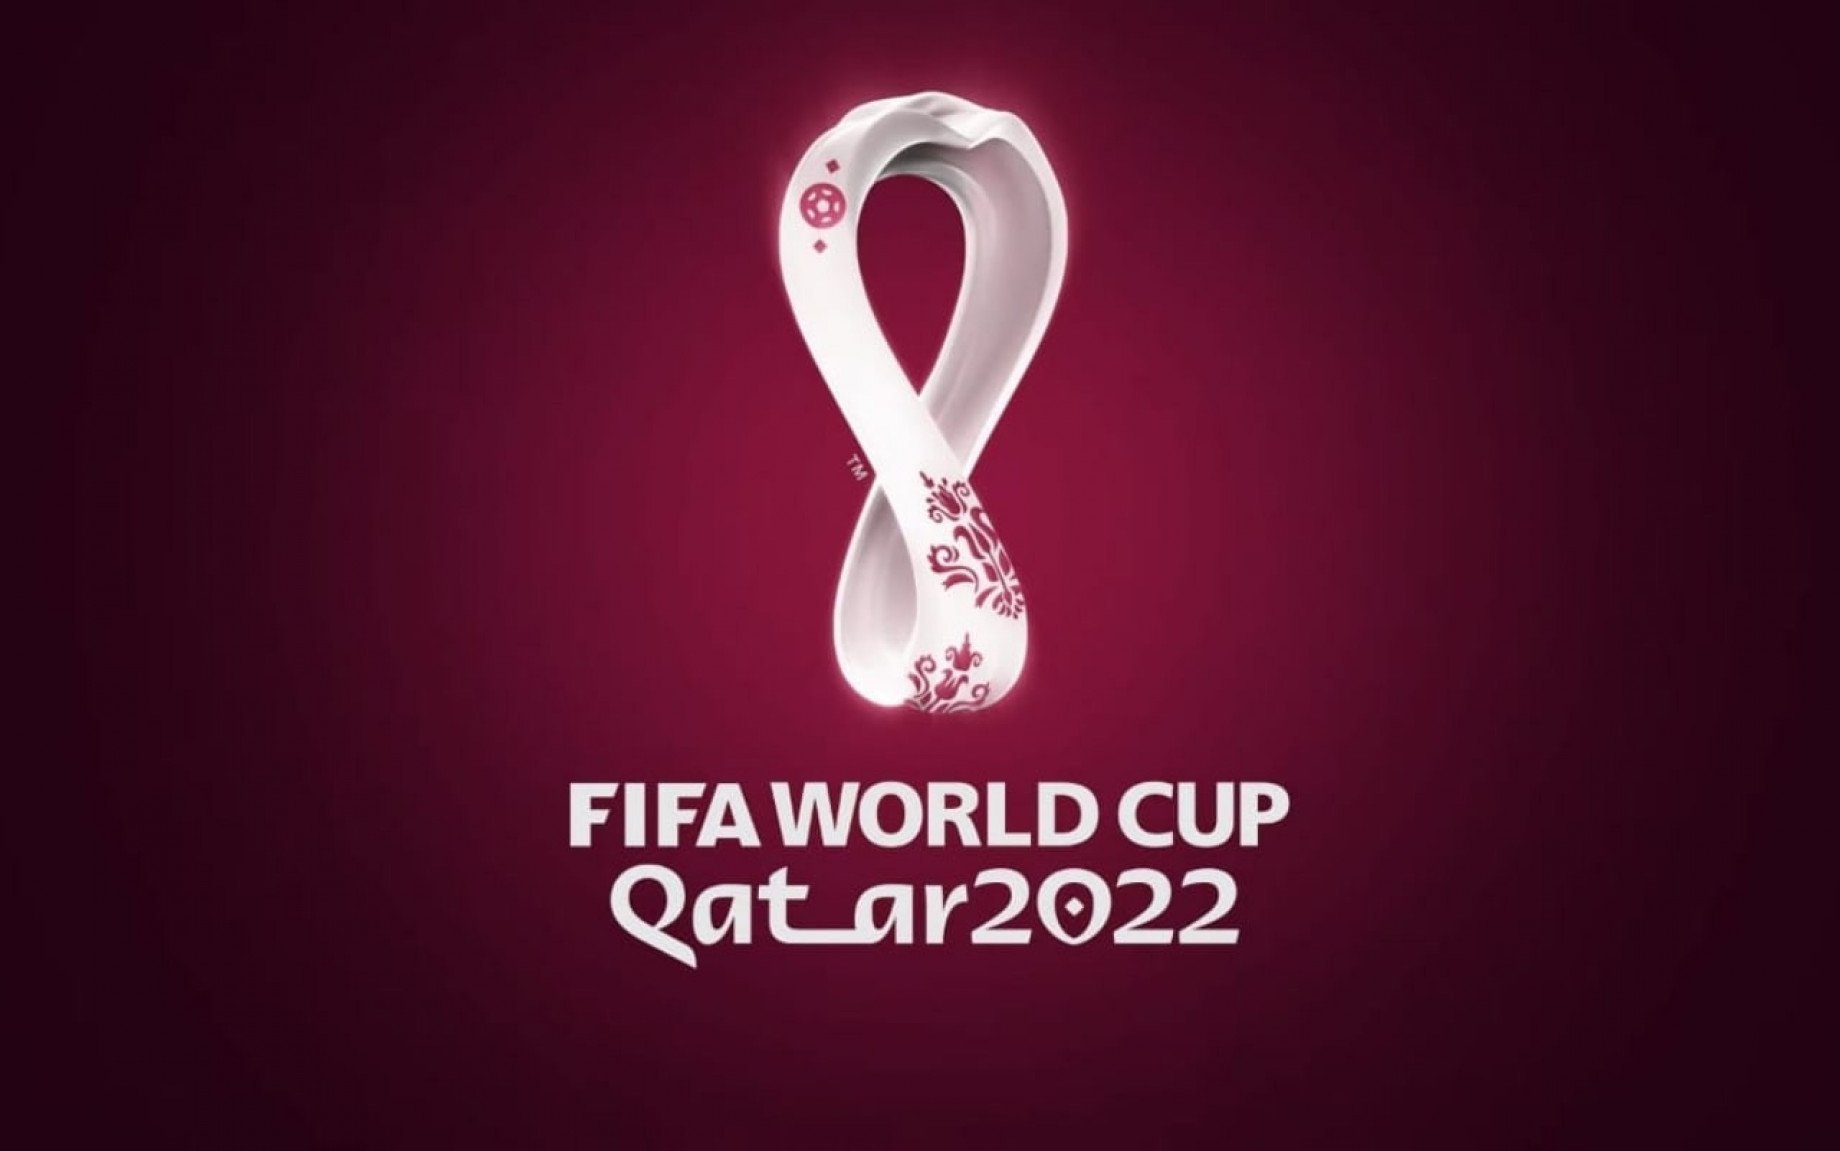 Argentina France, goal by Messi (32) Qatar 2022 World Cup final